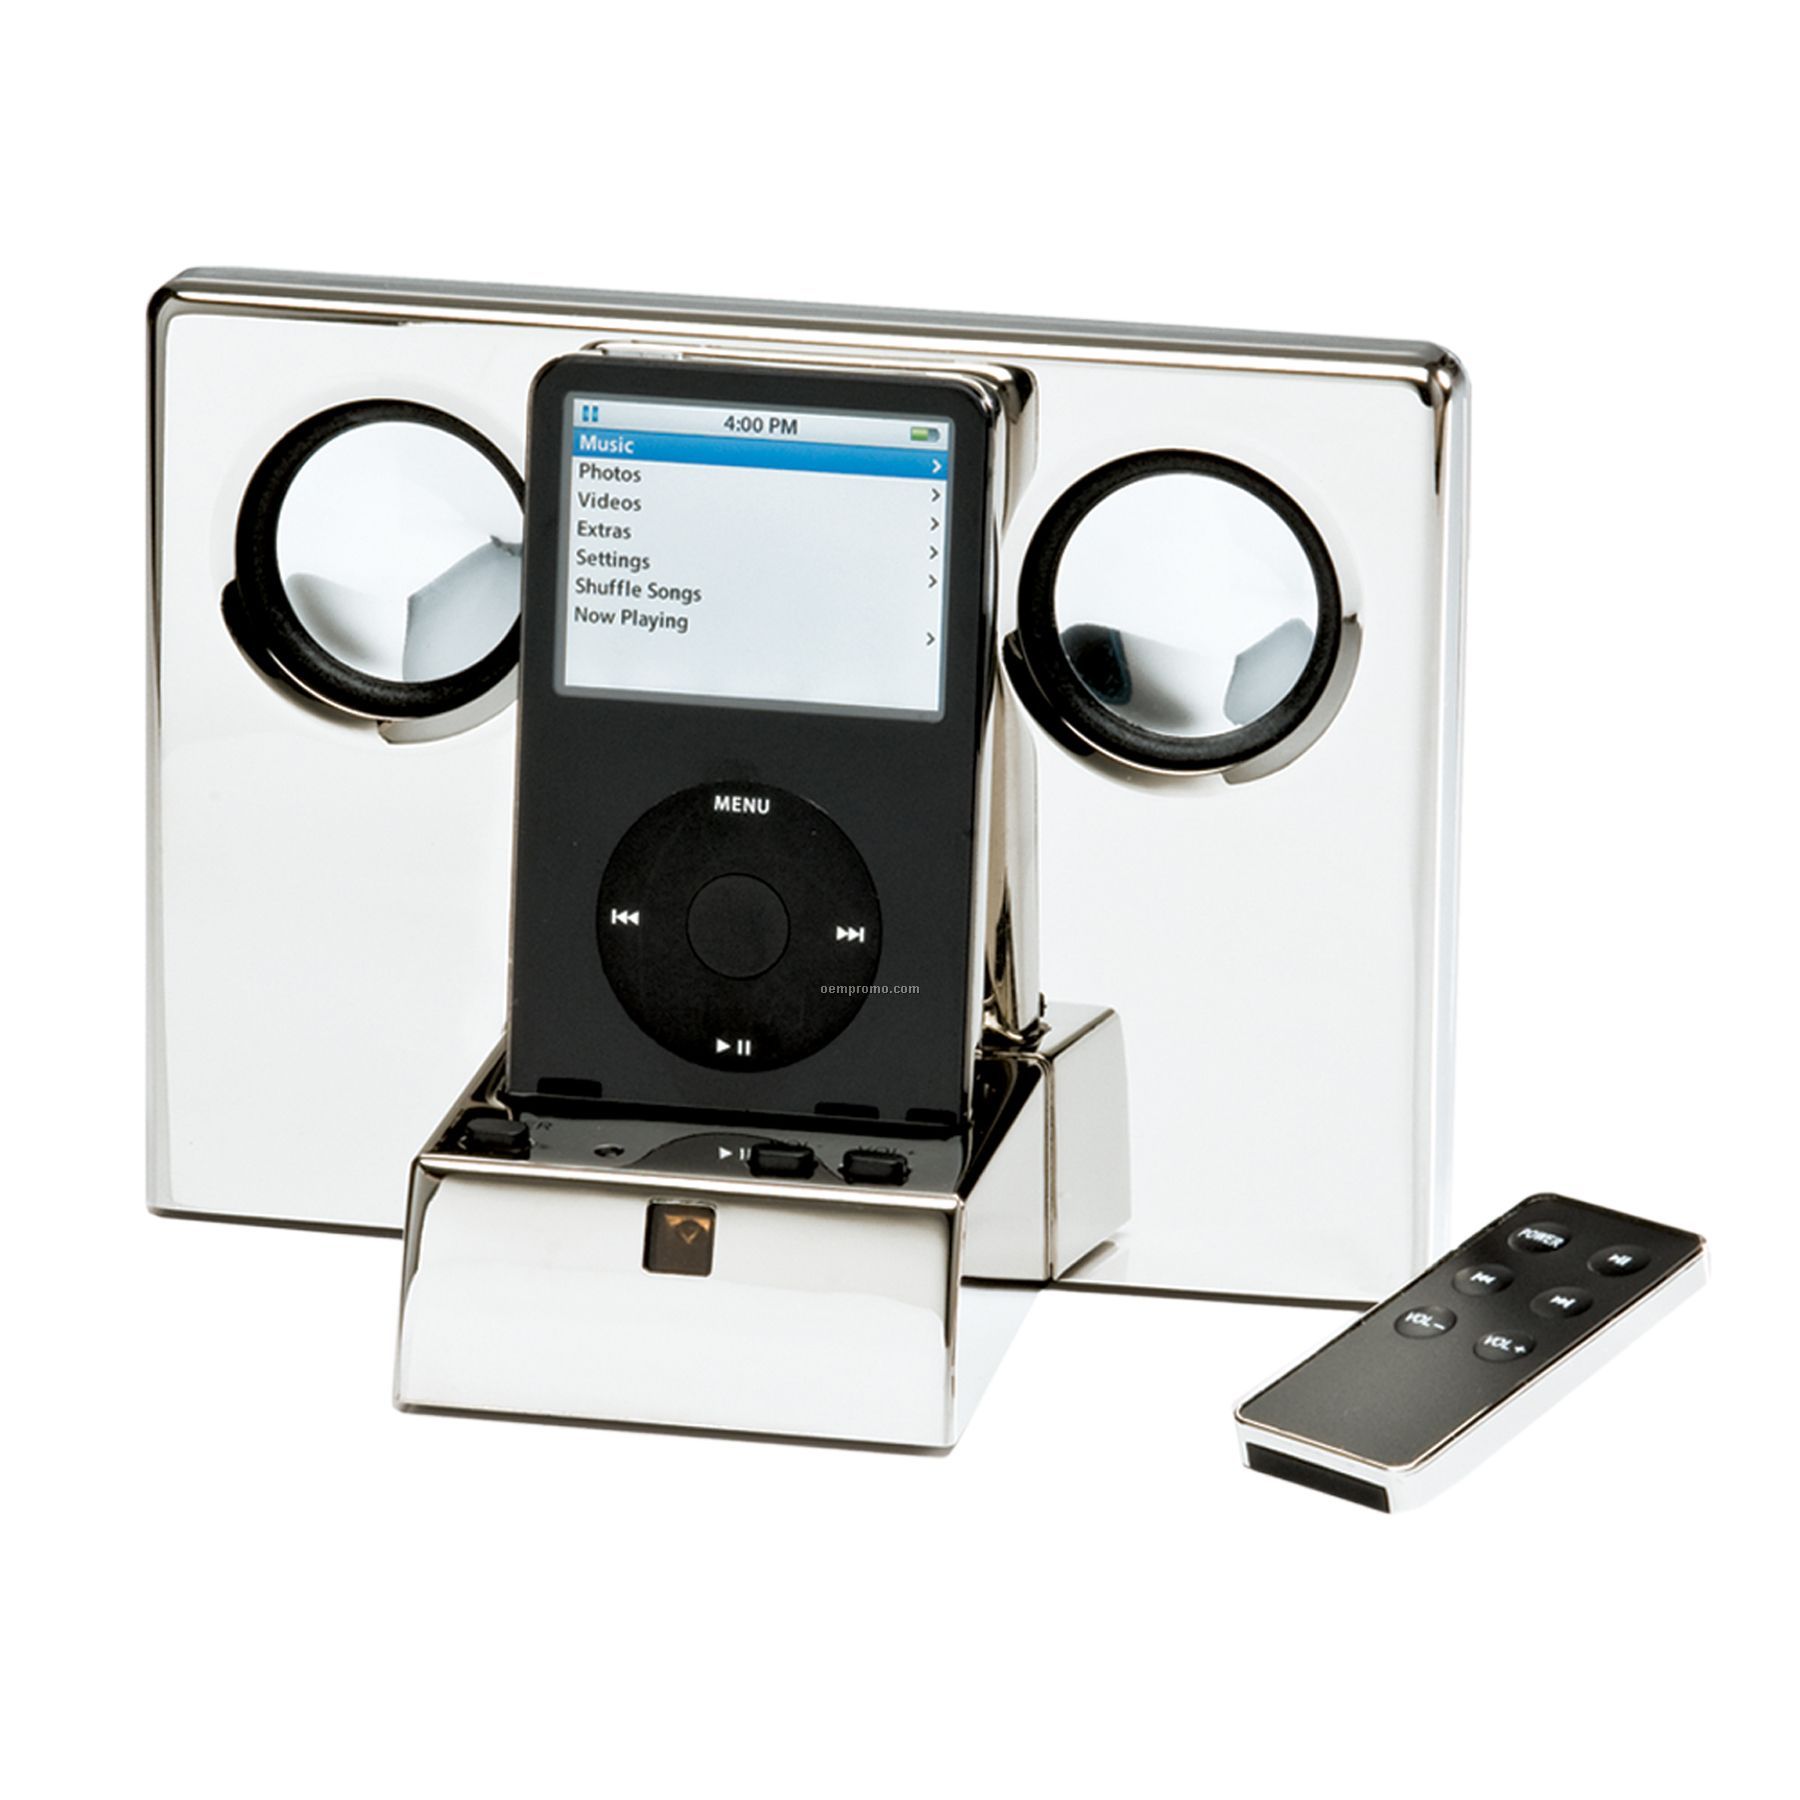 Nickel Plated Ipod Music Player